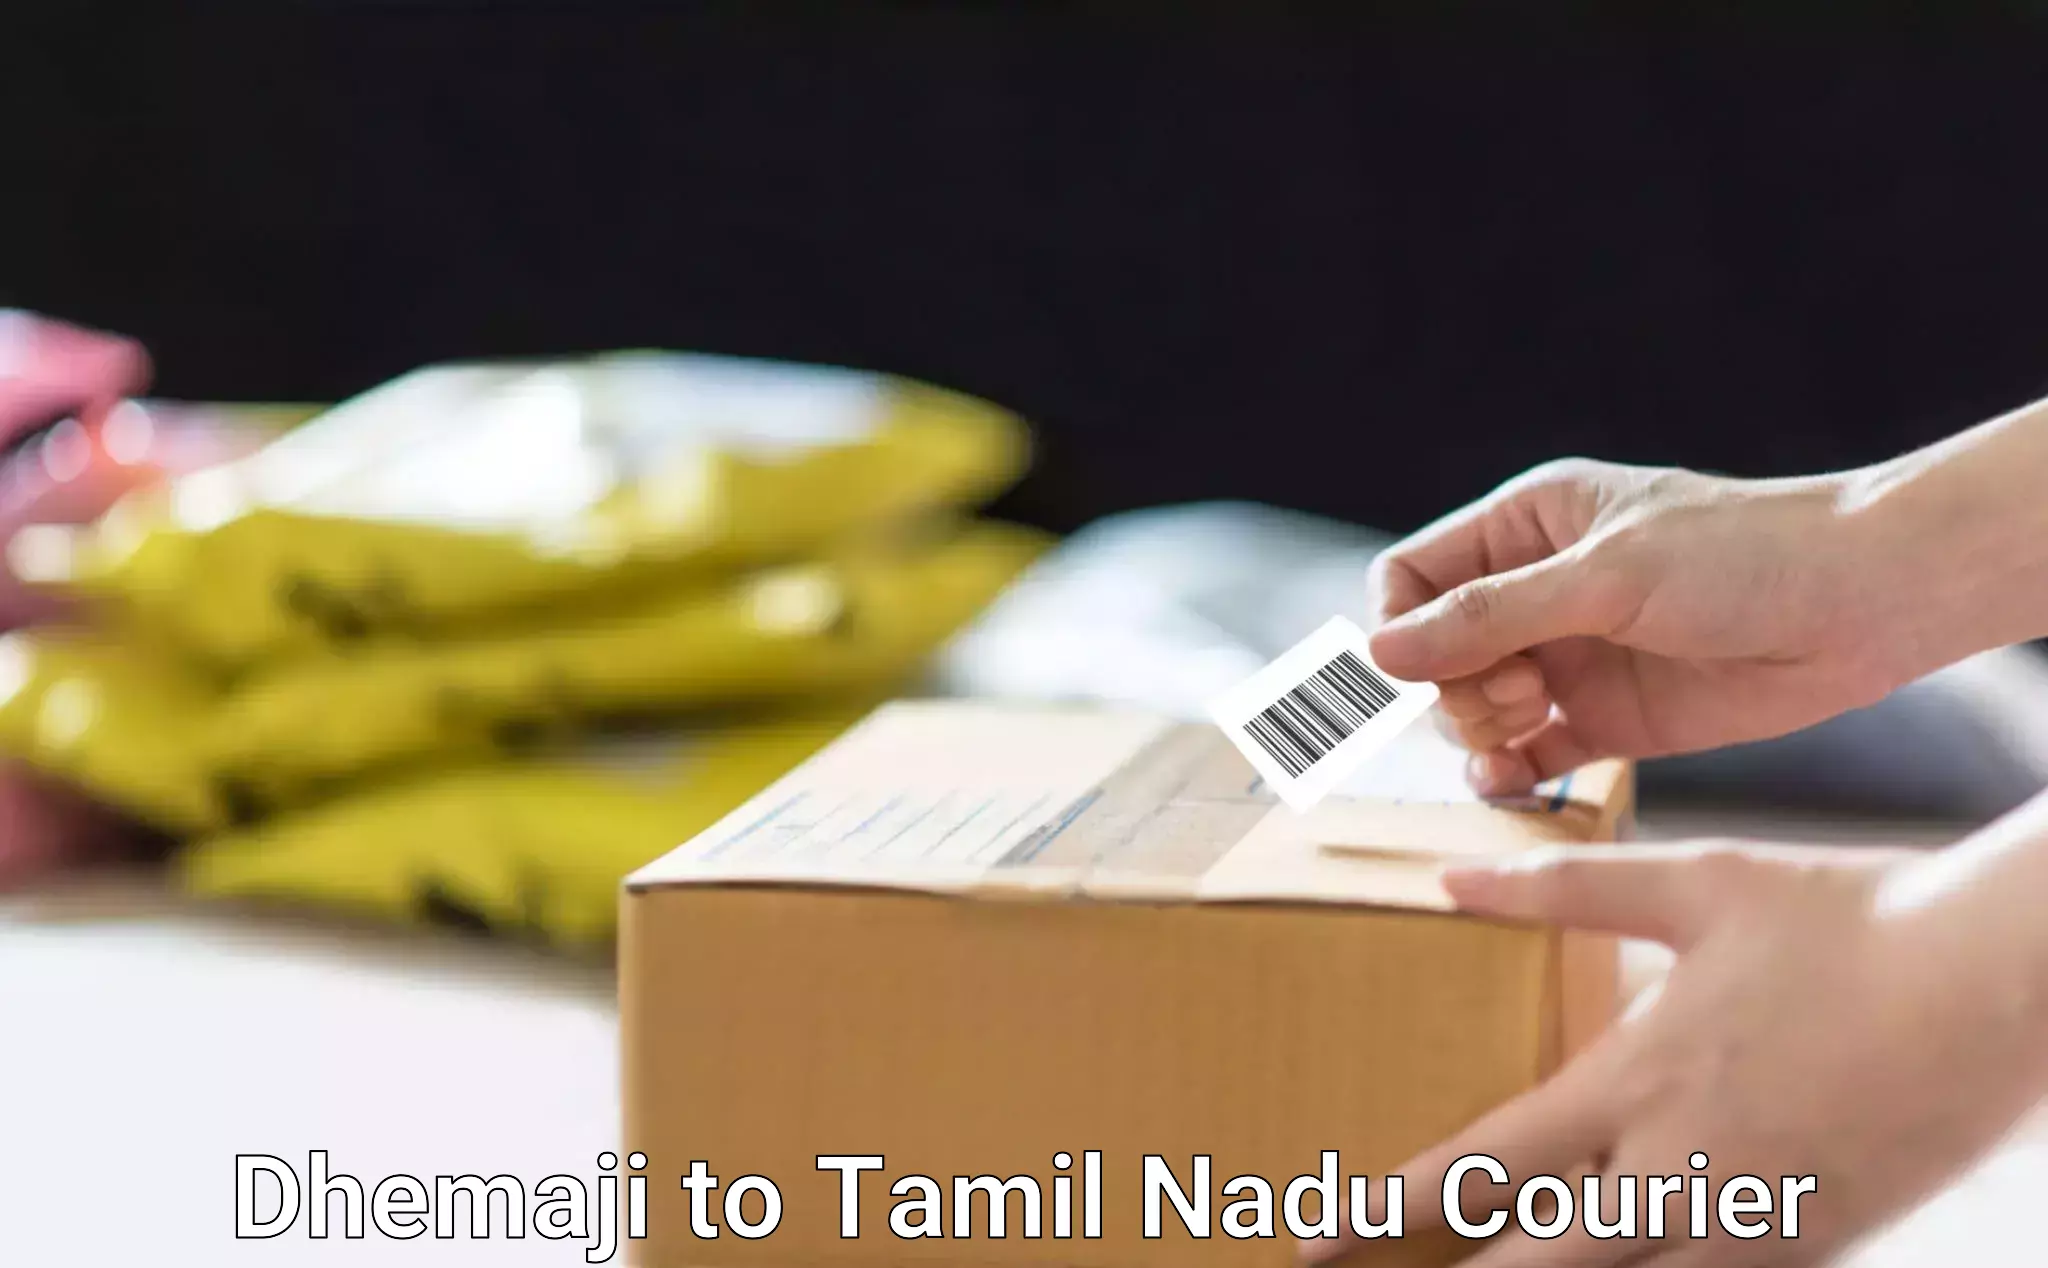 Full-service courier options Dhemaji to Tamil Nadu